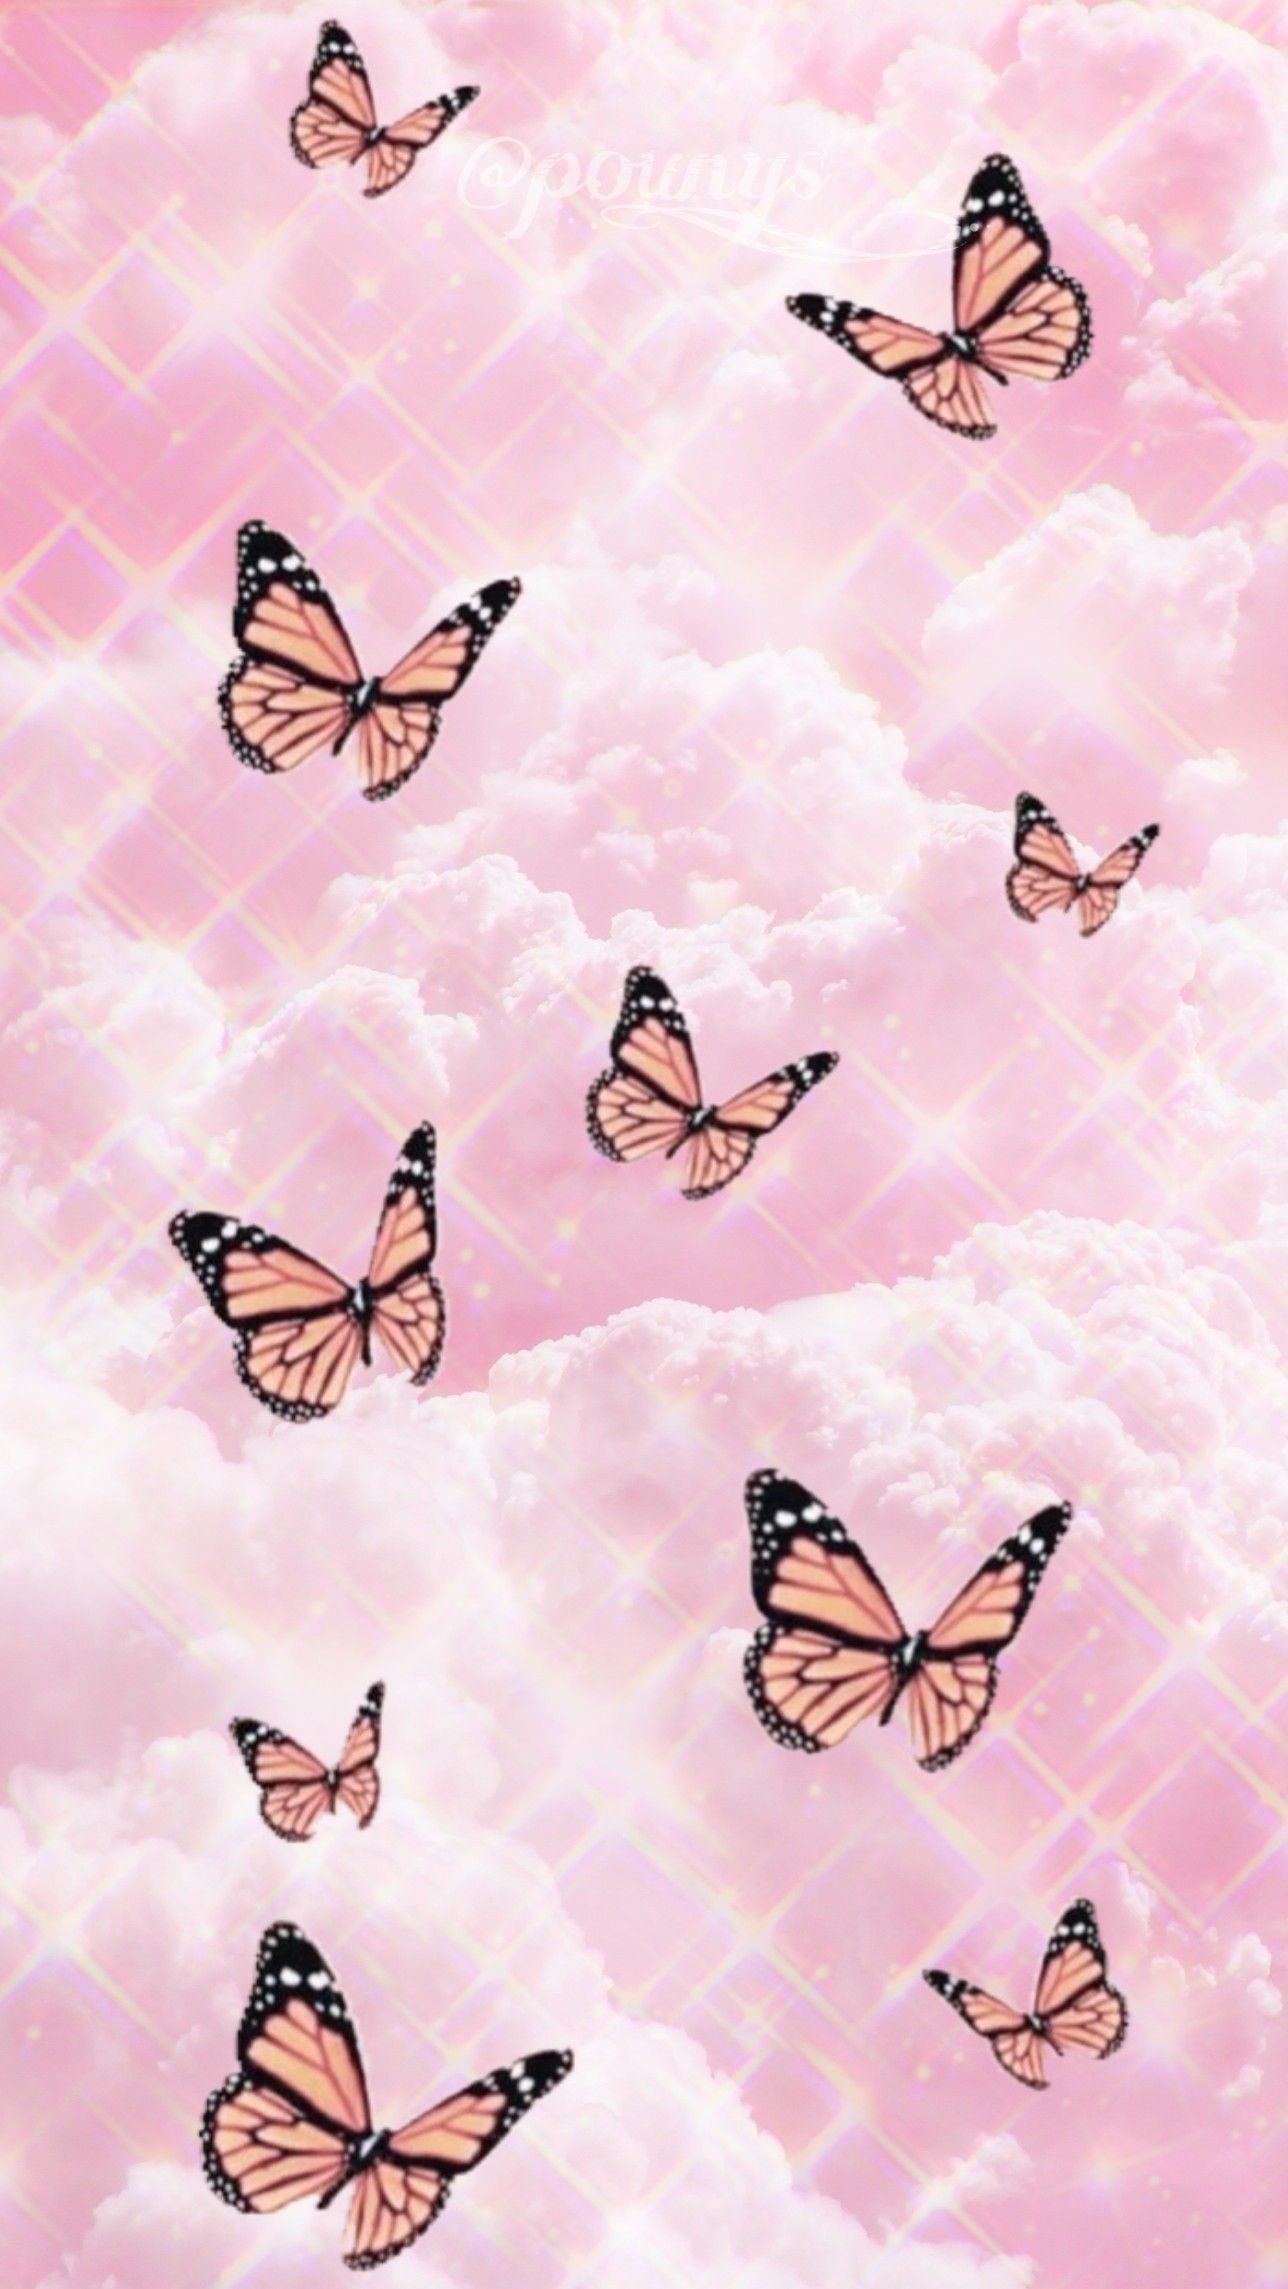 Pink Butterfly HD Wallpaper High Quality